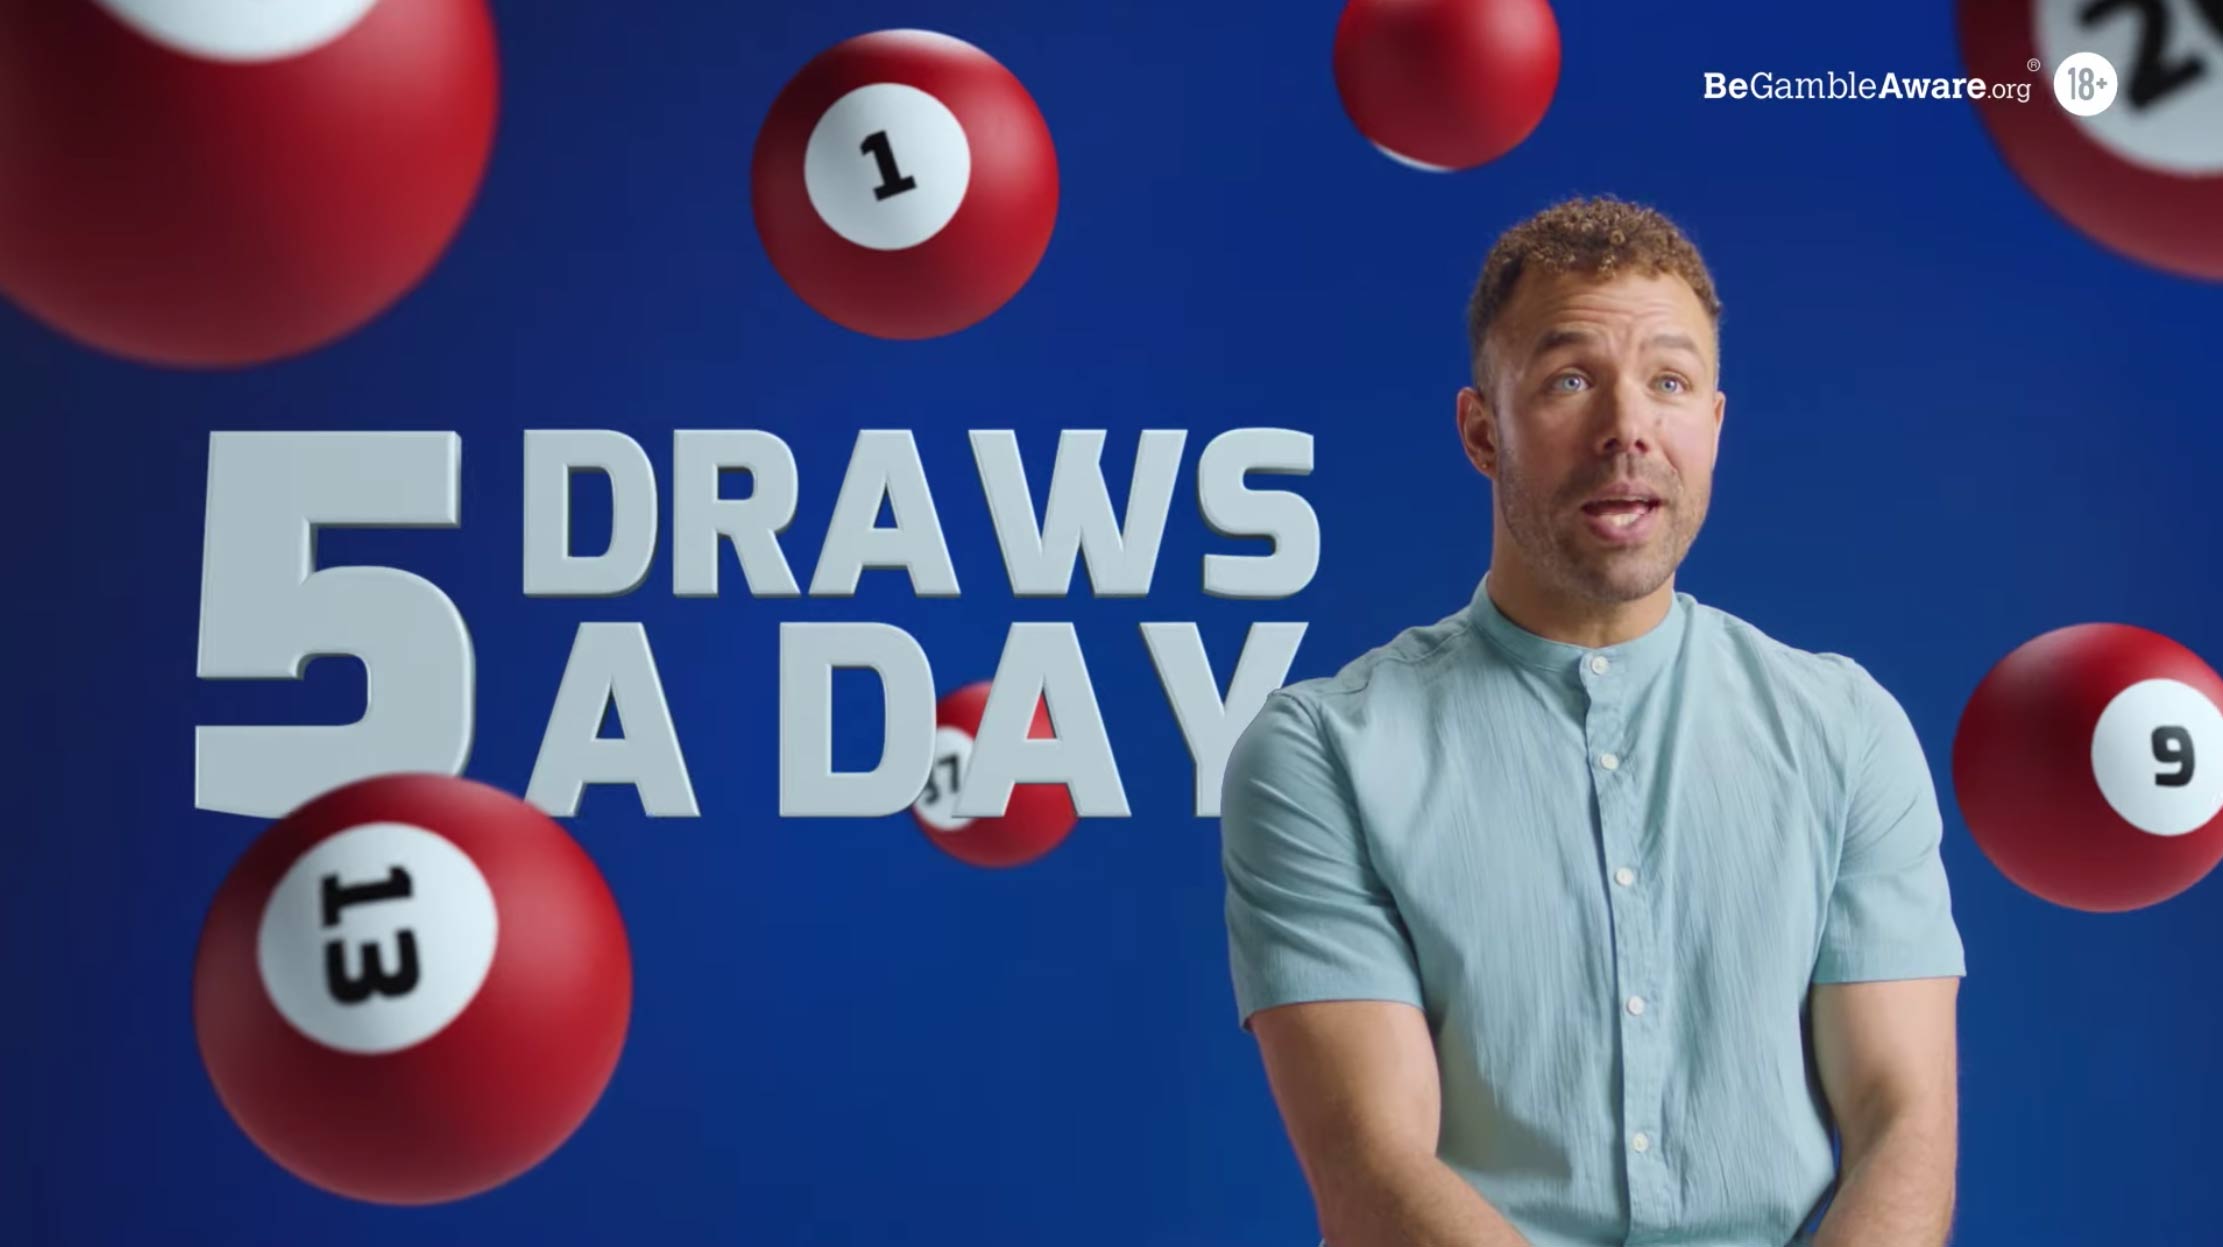 Betfred Lotto Nifty Fifty TV Ad